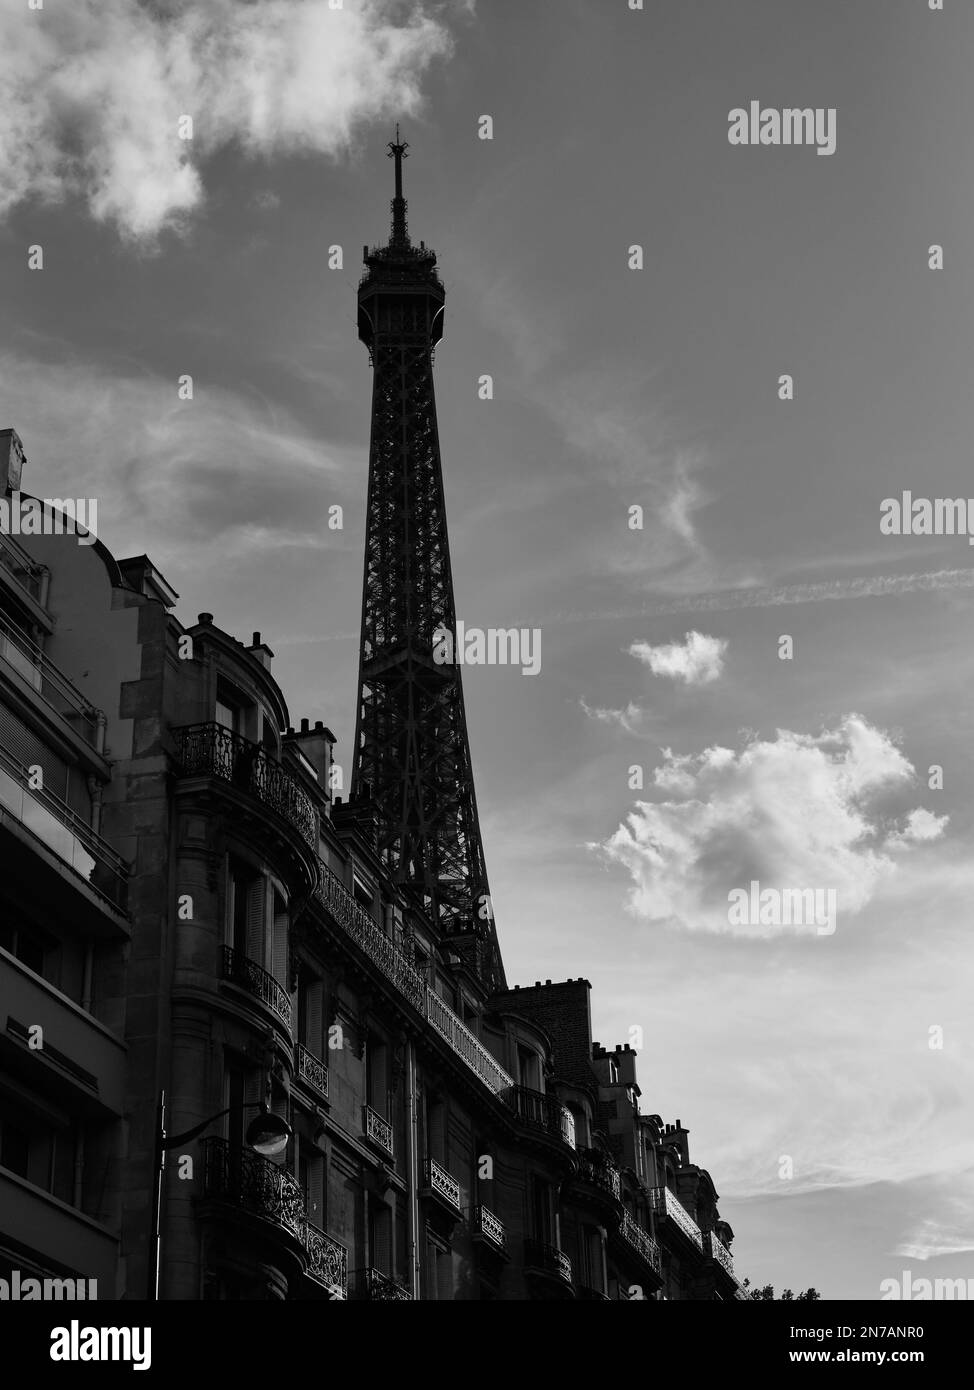 An angle shot of a wonderful and magnificent Eiffel tower in Paris, France Stock Photo